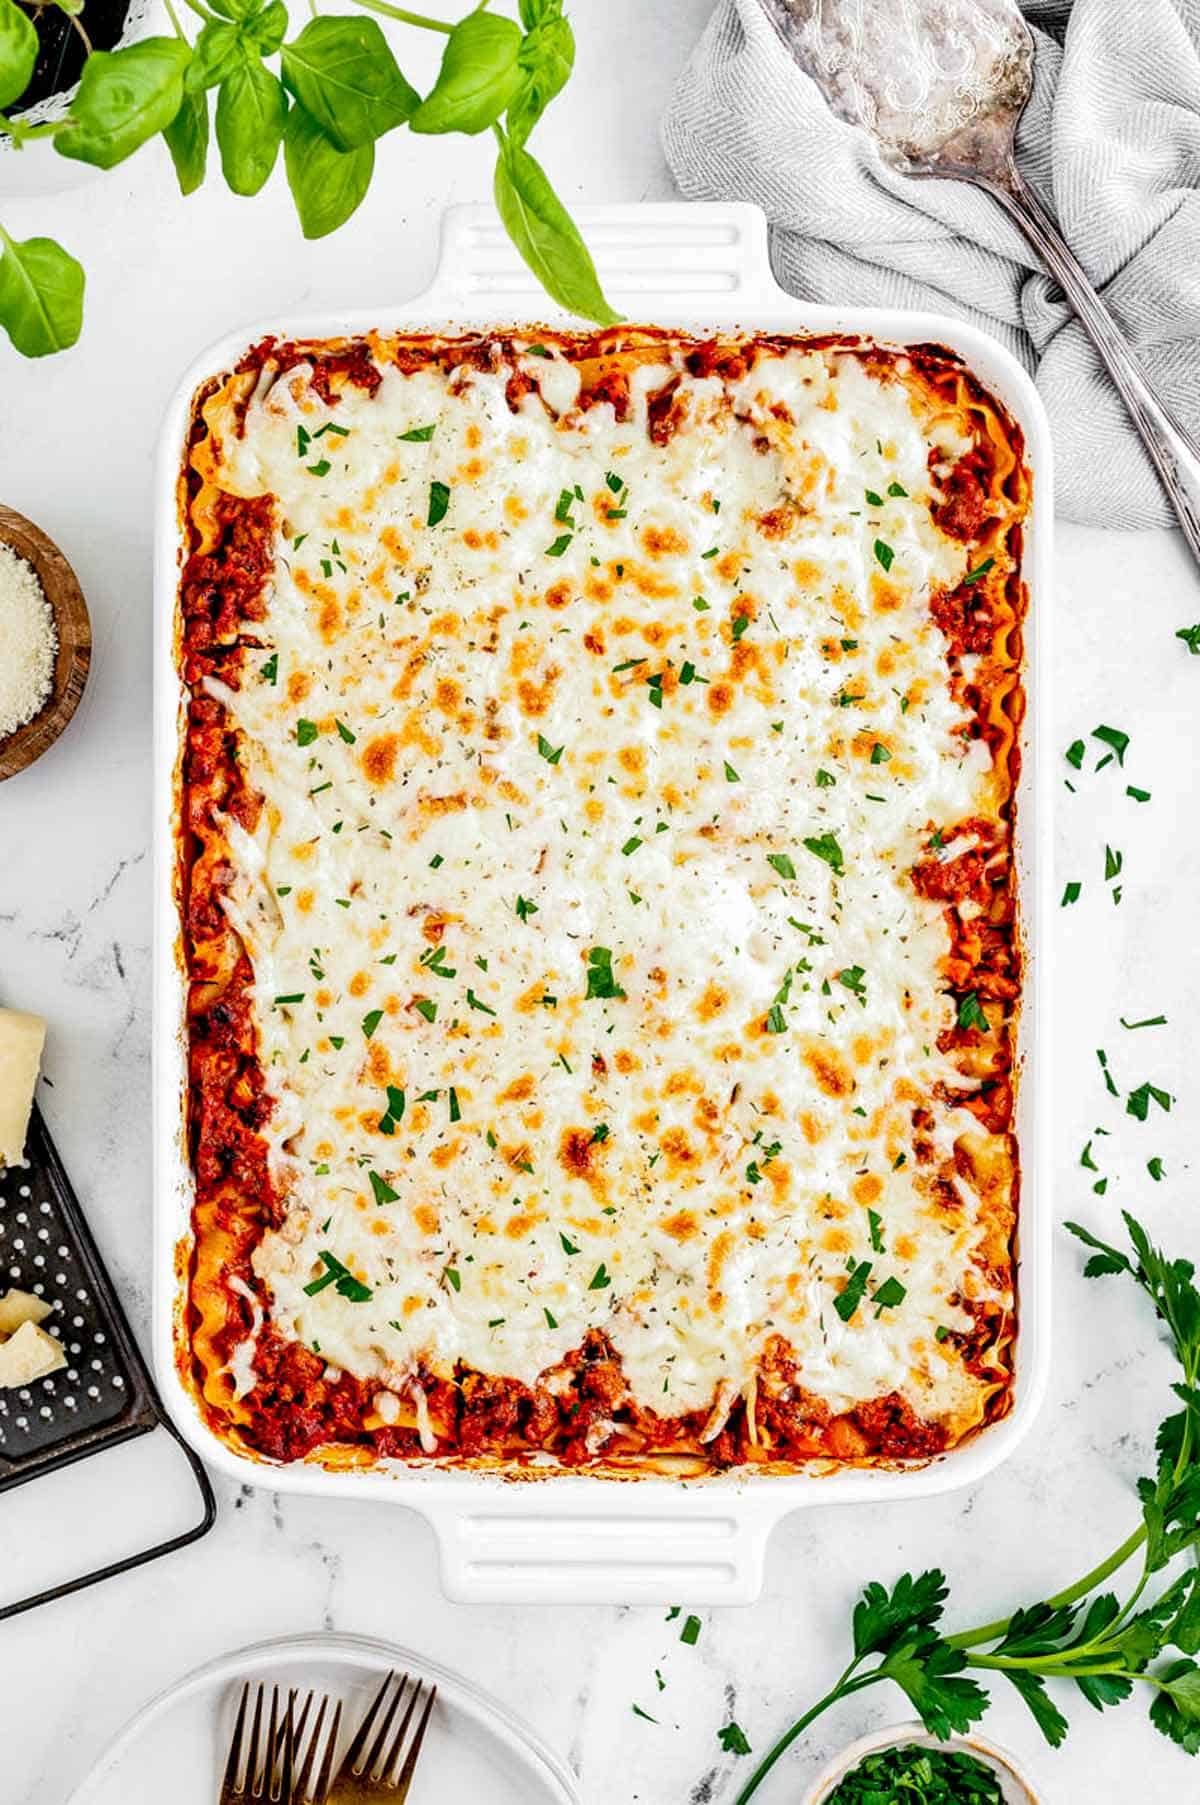 The baked lasagna recipe with bechamel in a casserole dish.